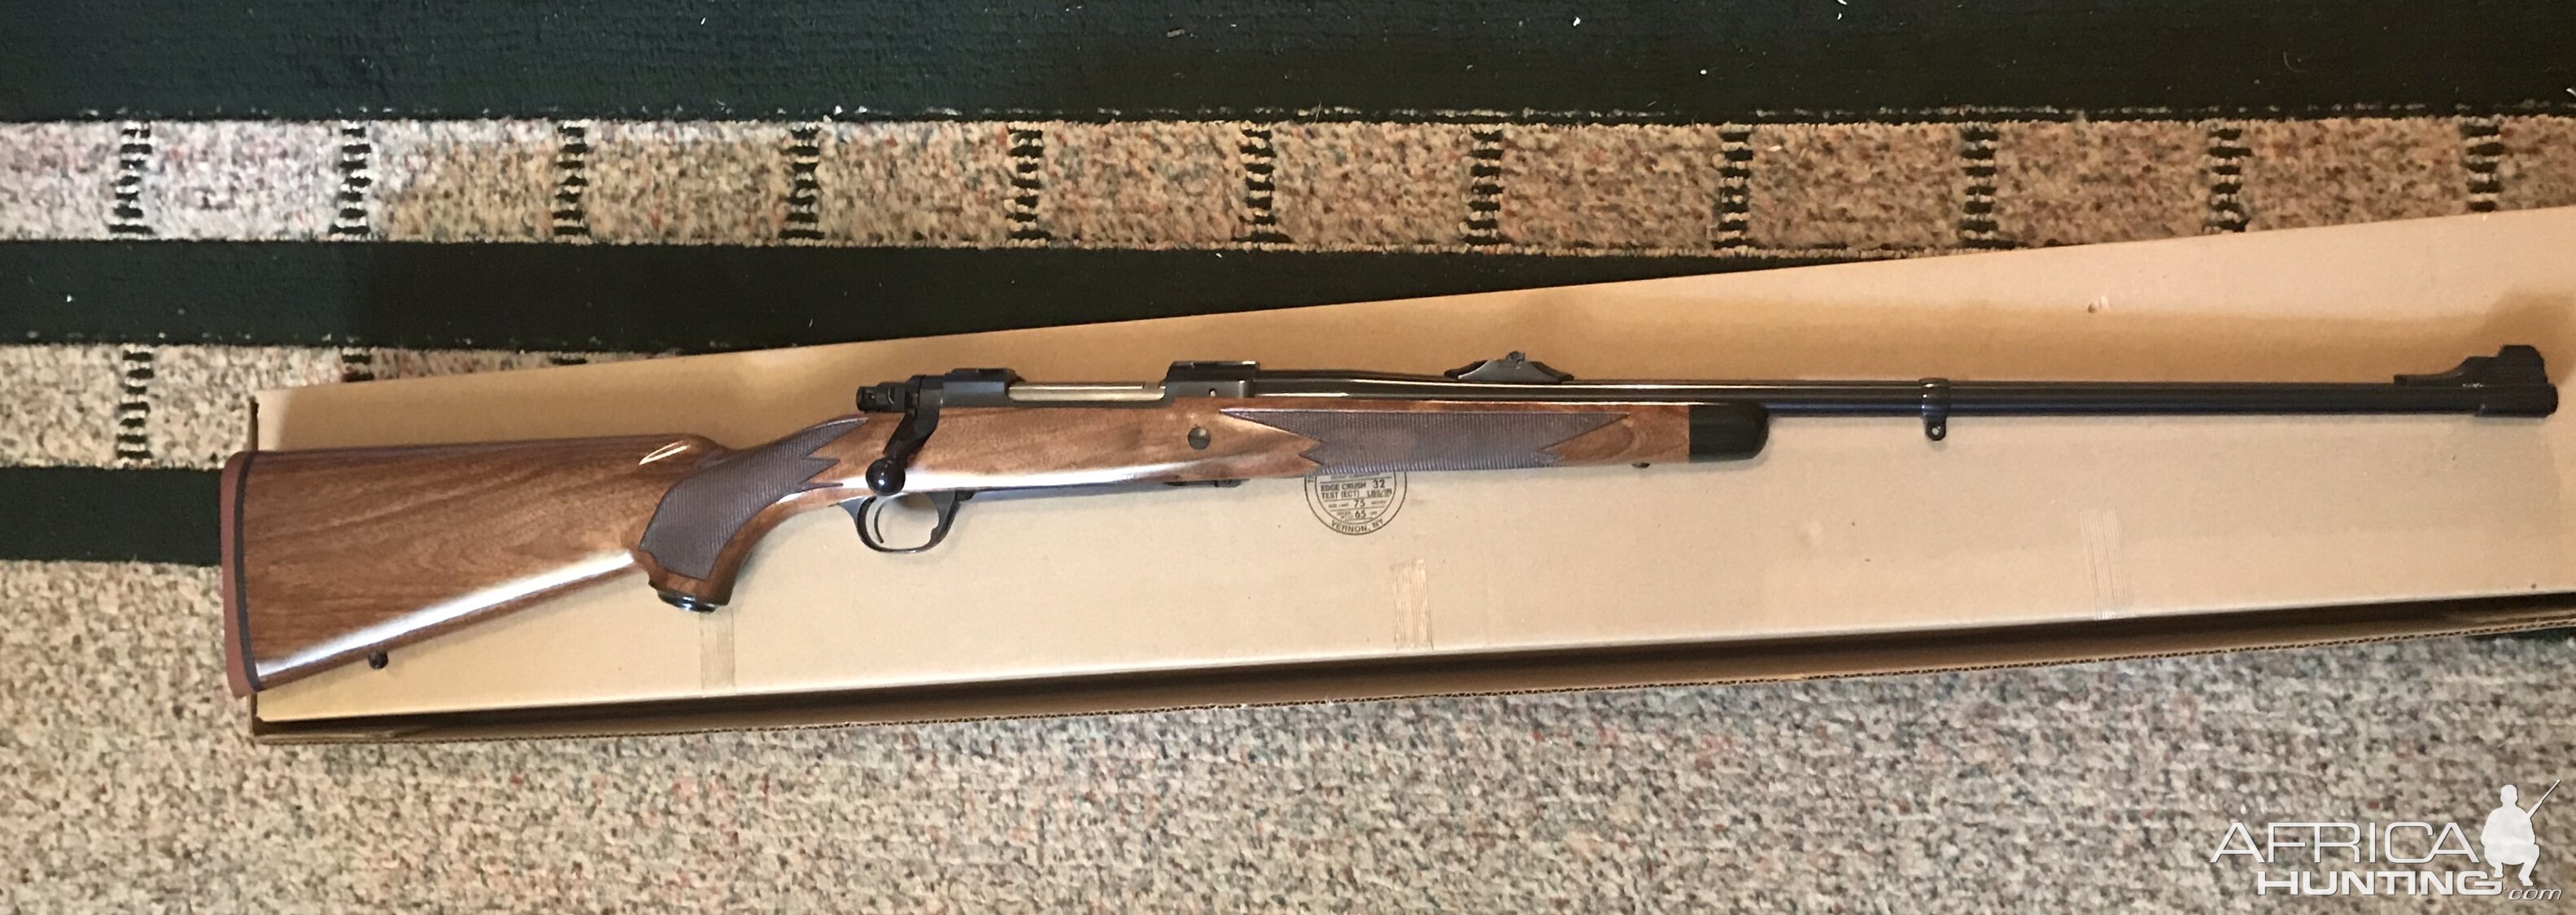 Ruger M77 9.3x 62 Rifle